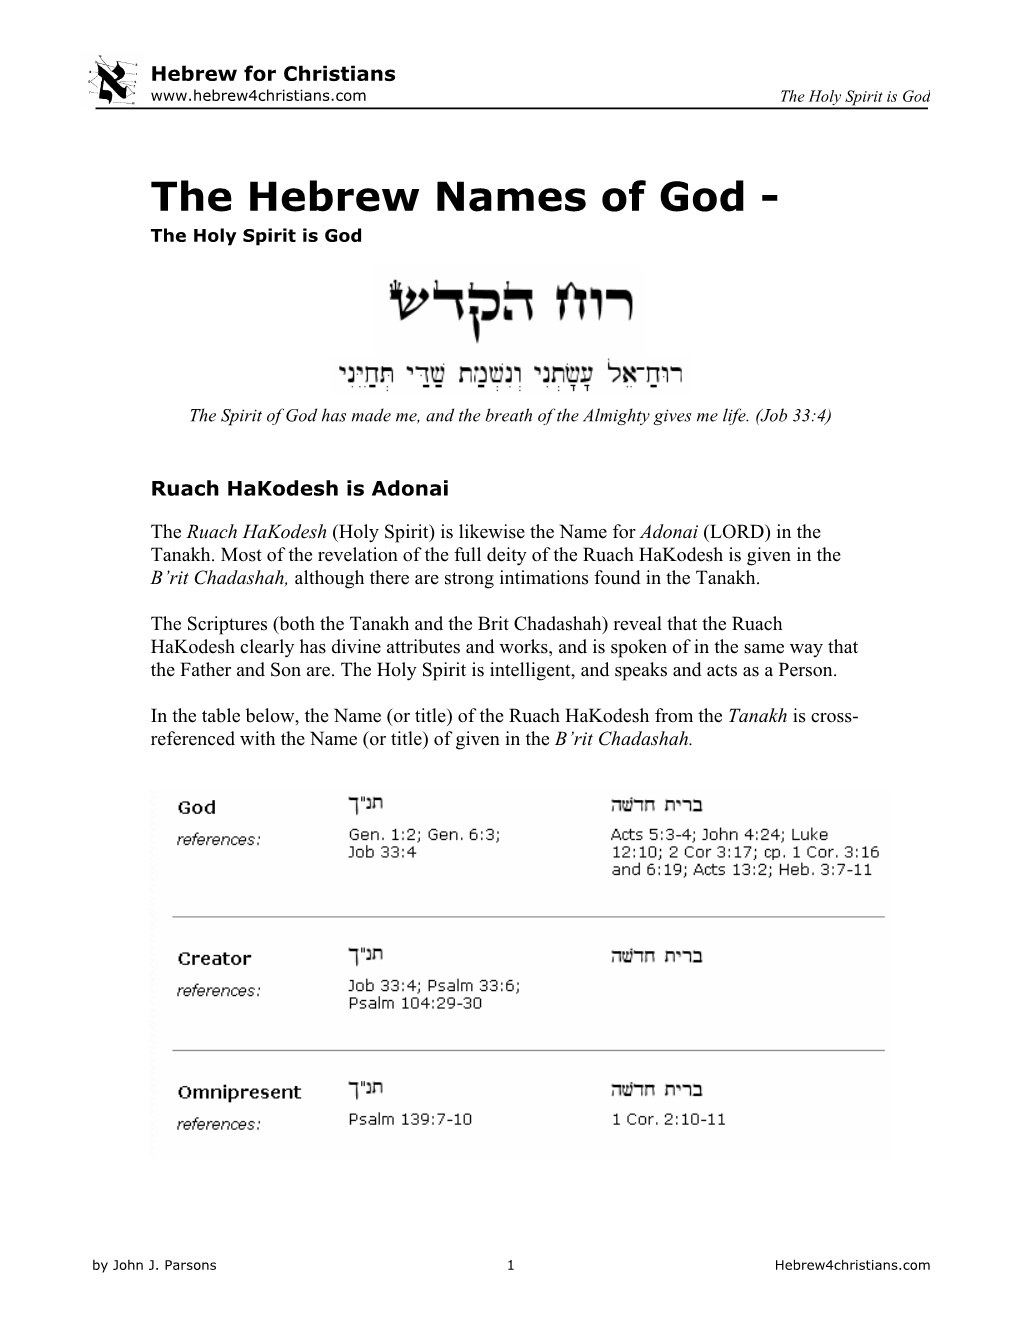 The Hebrew Names of God - the Holy Spirit Is God